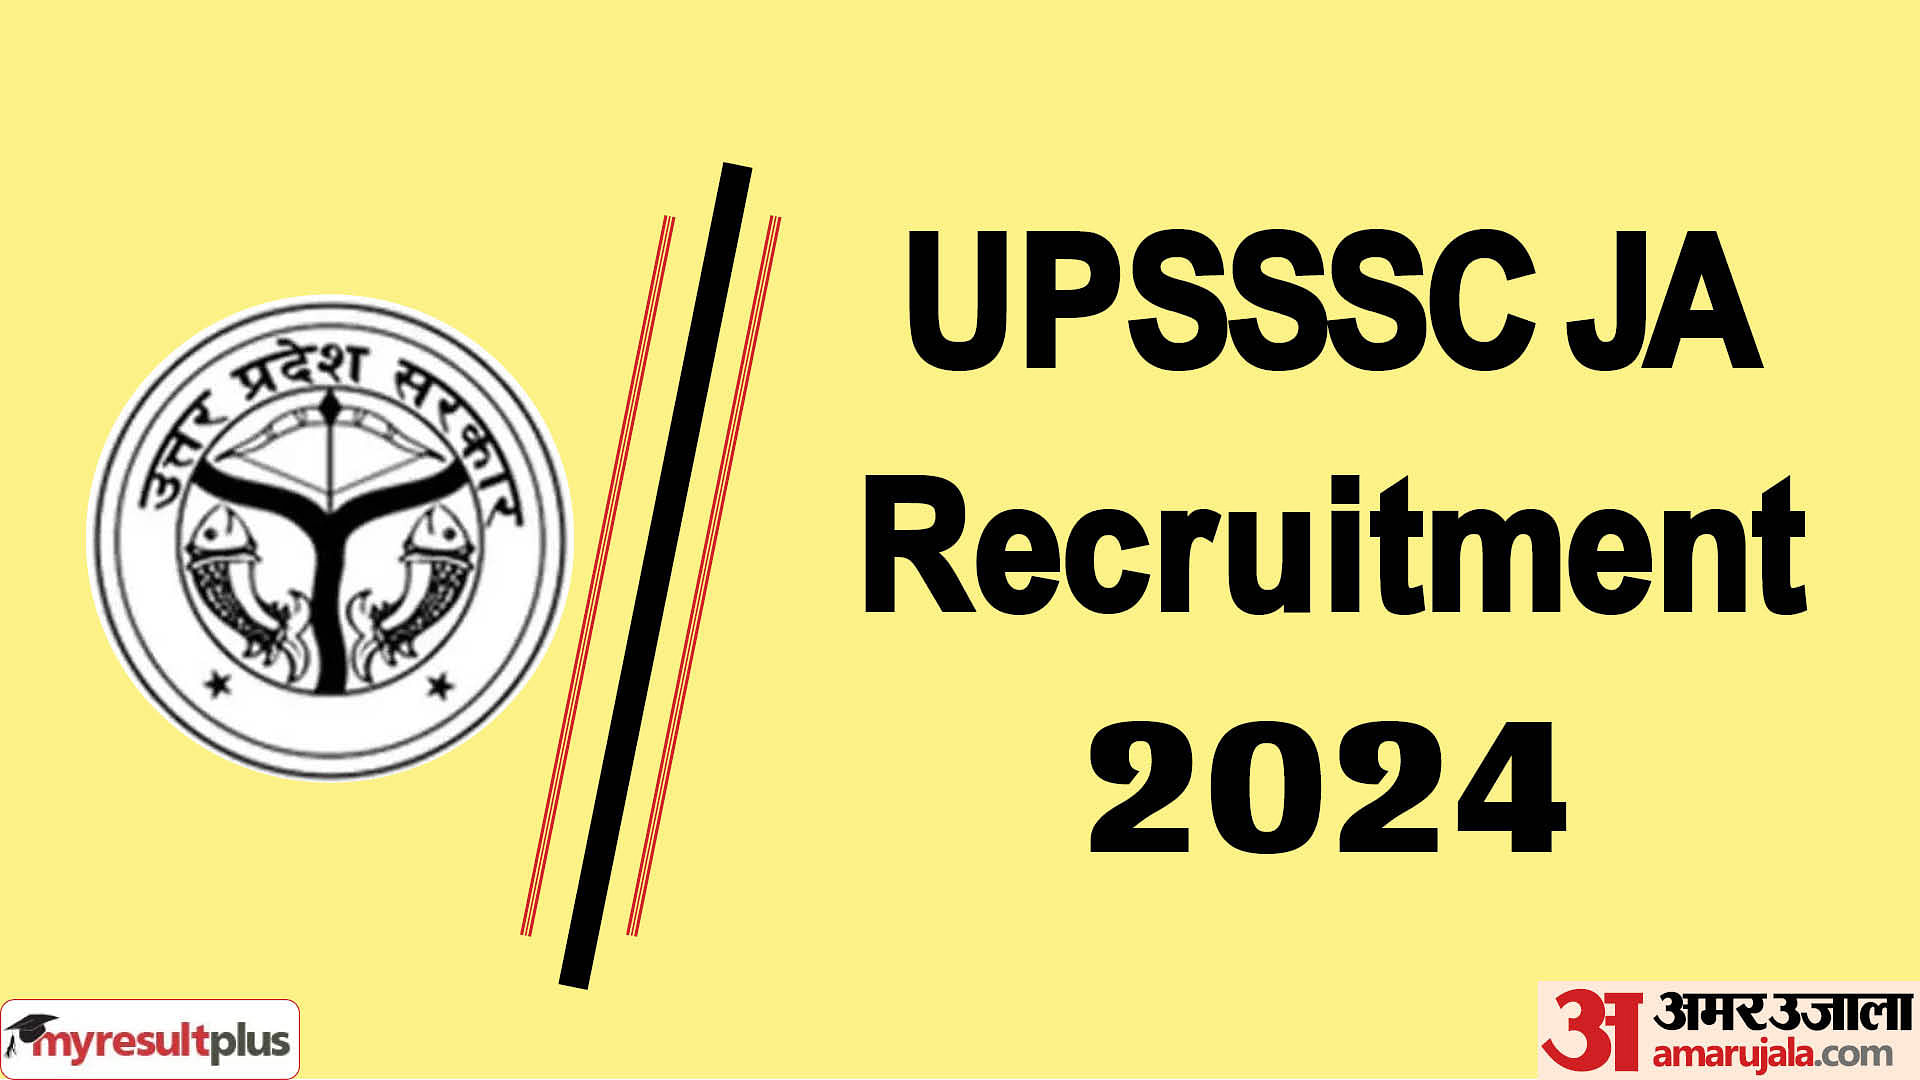 UPSSSC Junior Analyst Recruitment 2024, Check eligibility and how to apply here